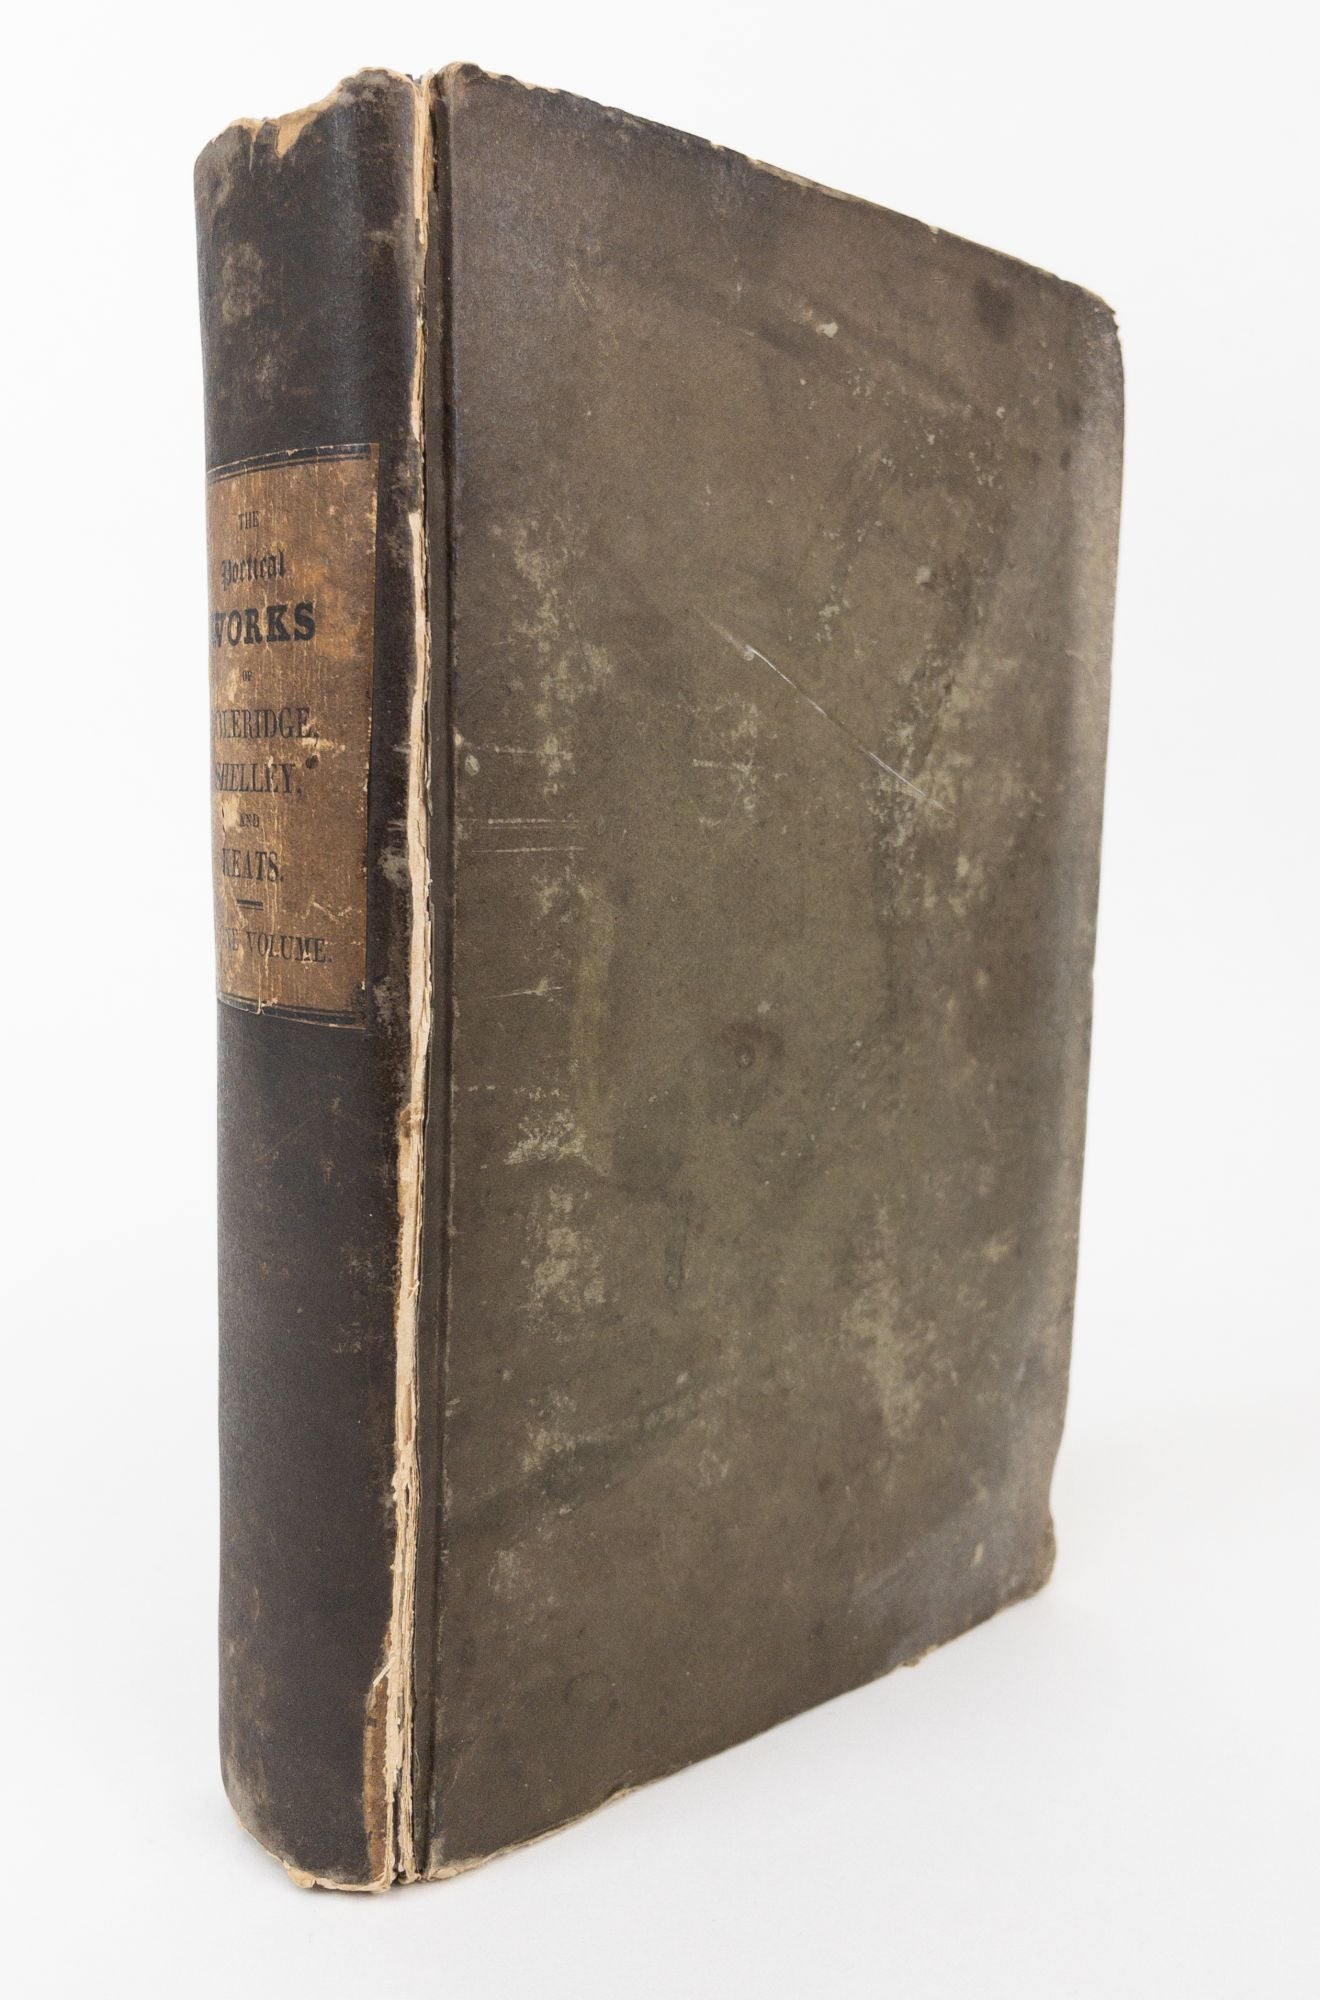 Product Image for THE POETICAL WORKS OF COLERIDGE, SHELLEY, AND KEATS. COMPLETE IN ONE VOLUME